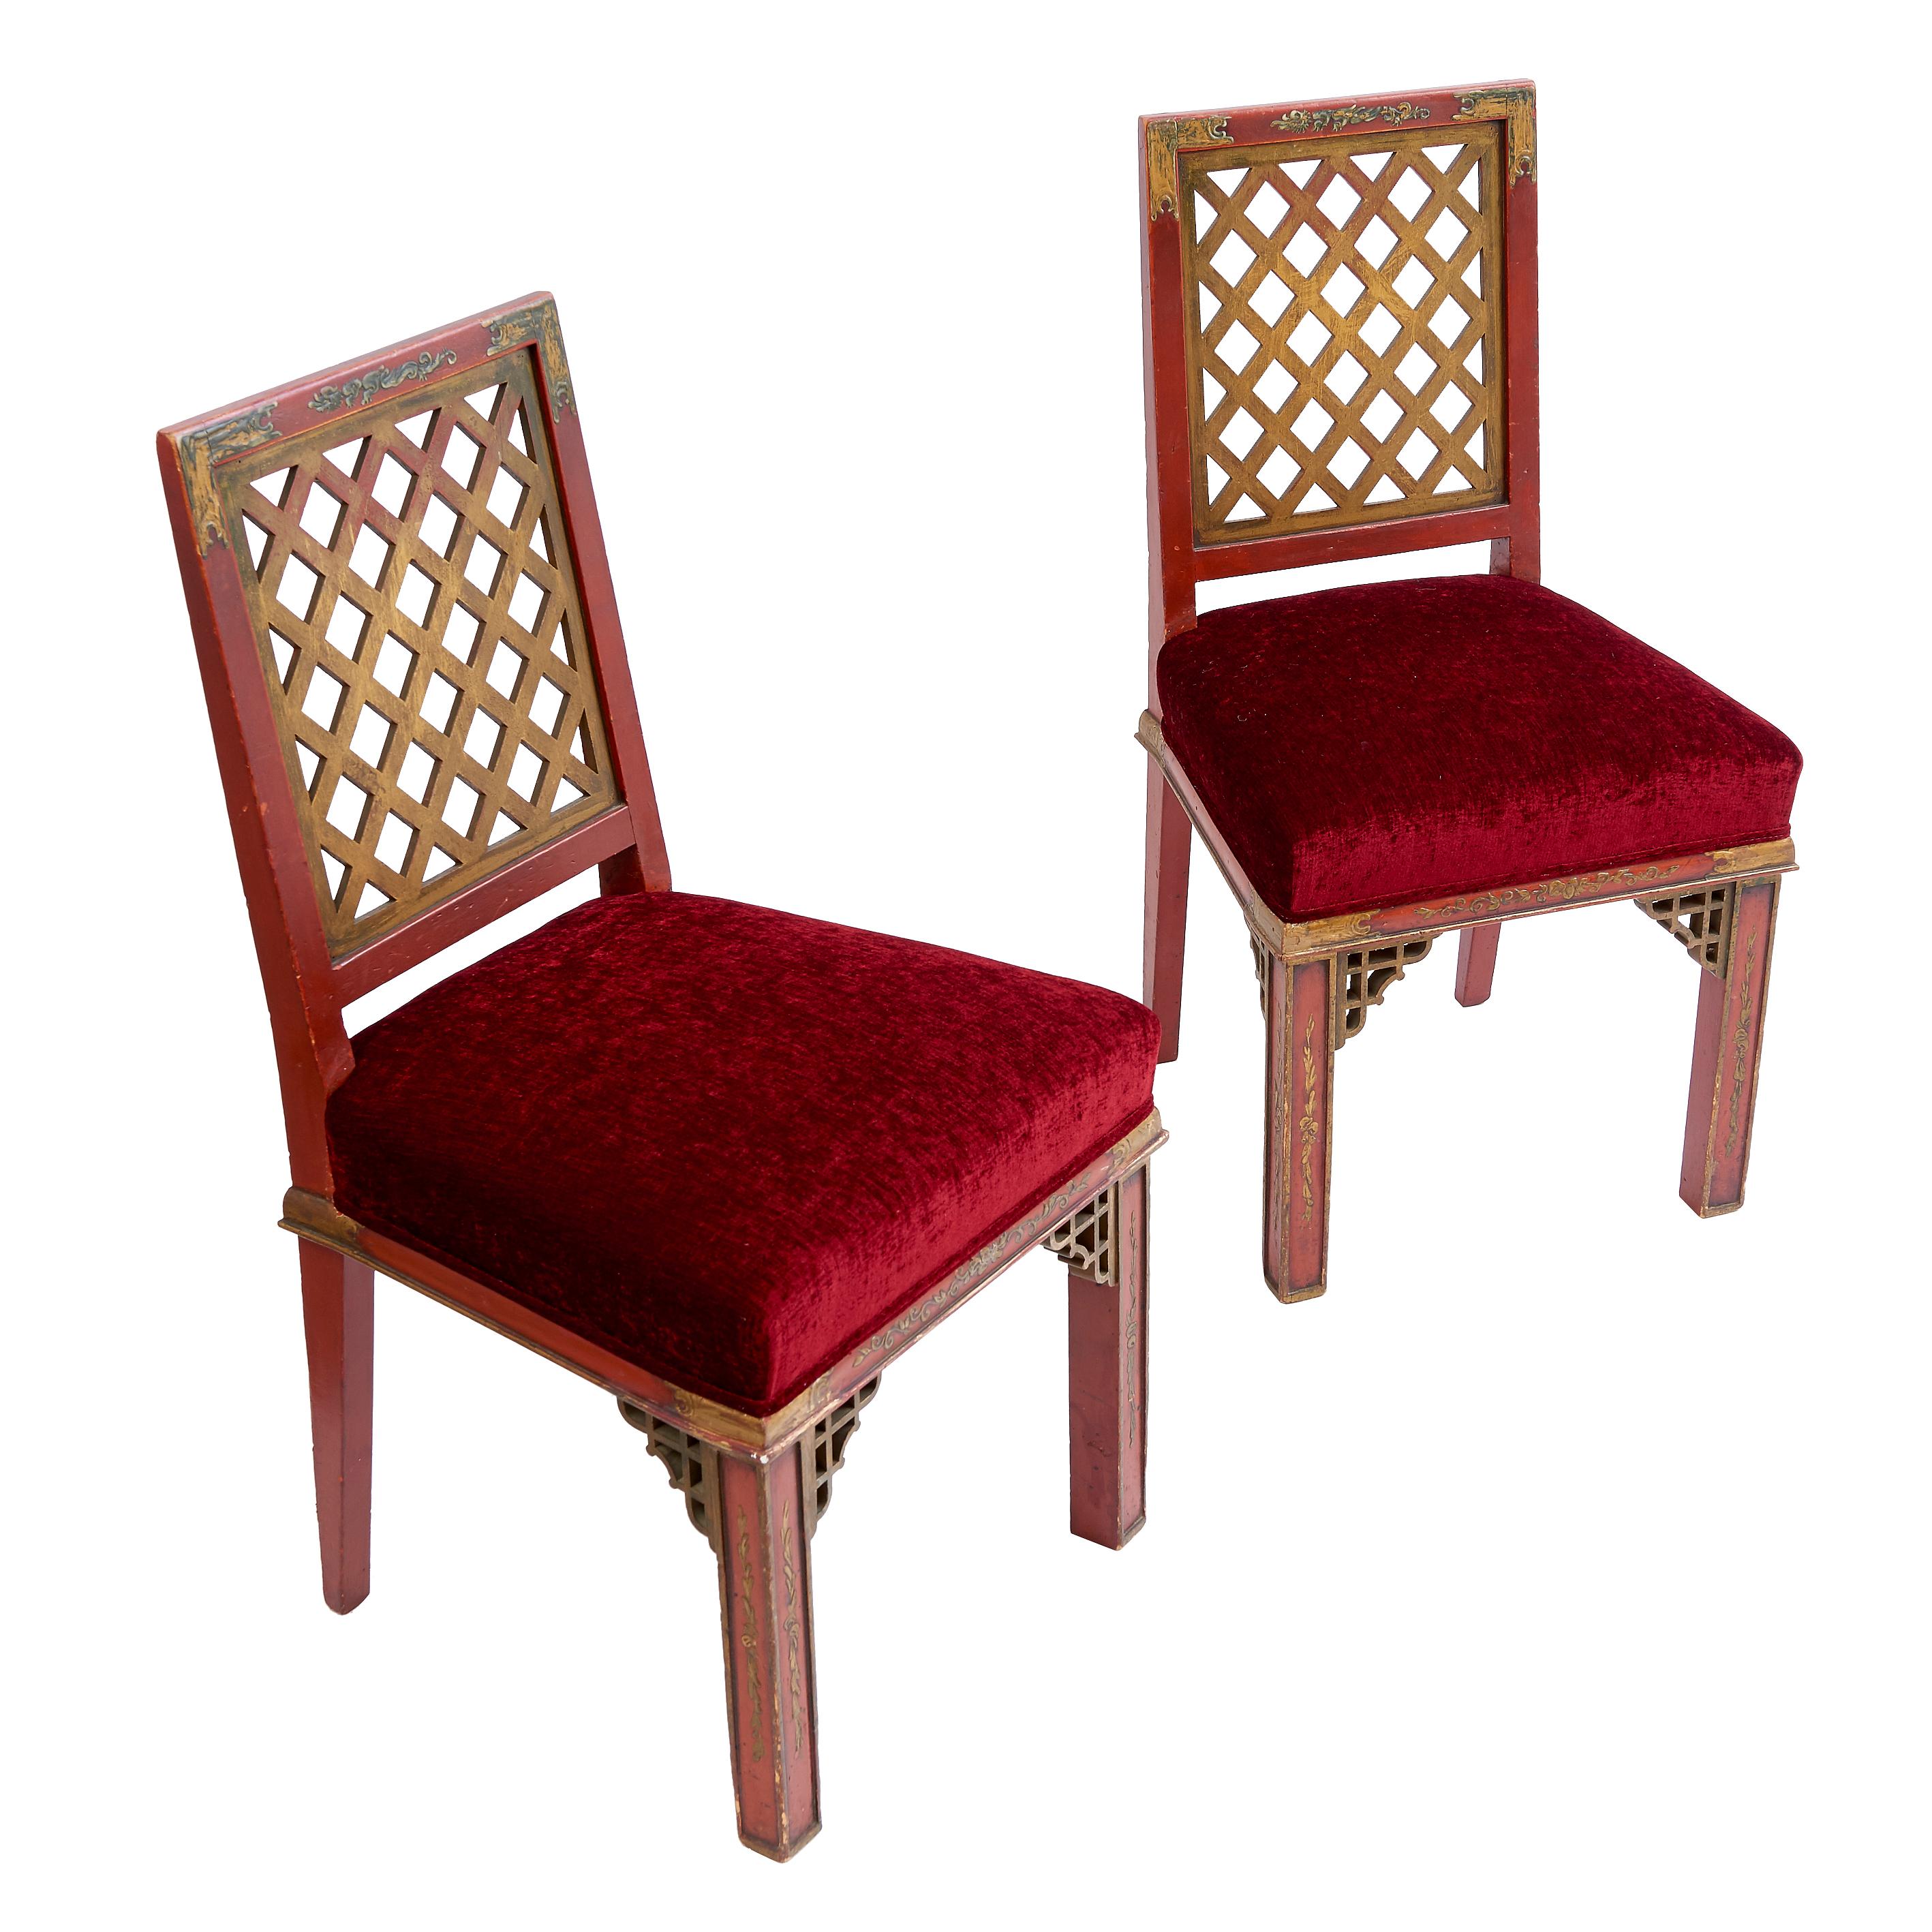 Pair of French Lacquer Chinoiserie Side Chairs, Maison Jansen, circa 1950s For Sale